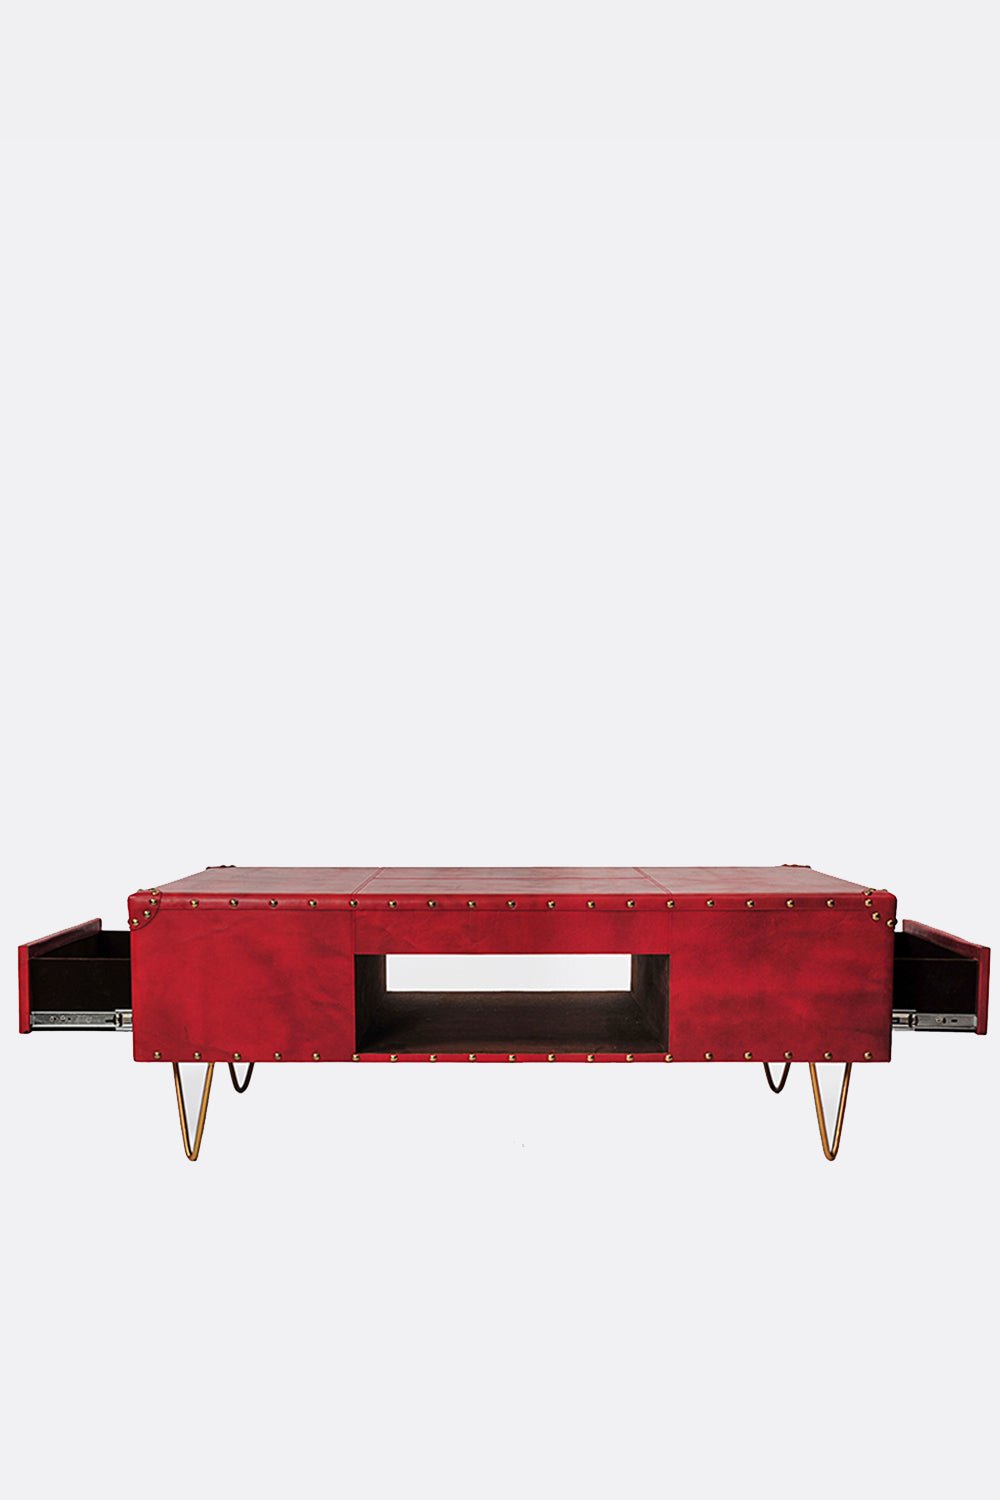 ROSE COFFEE TABLE IN LEATHER WITH METAL LEGS - ART AVENUE